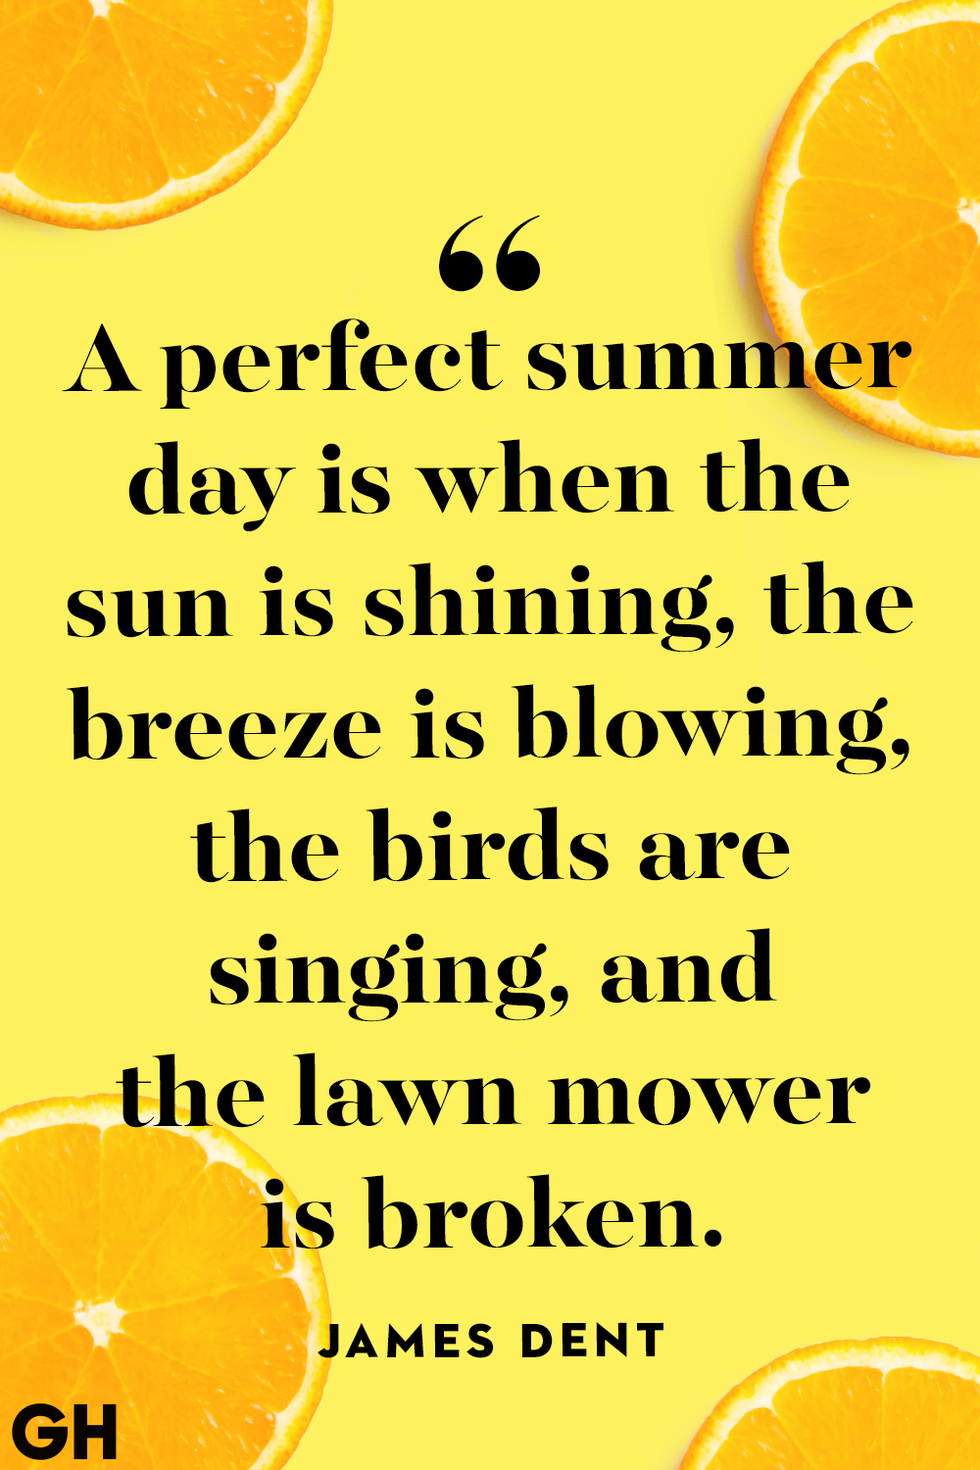 summer quotes james dent